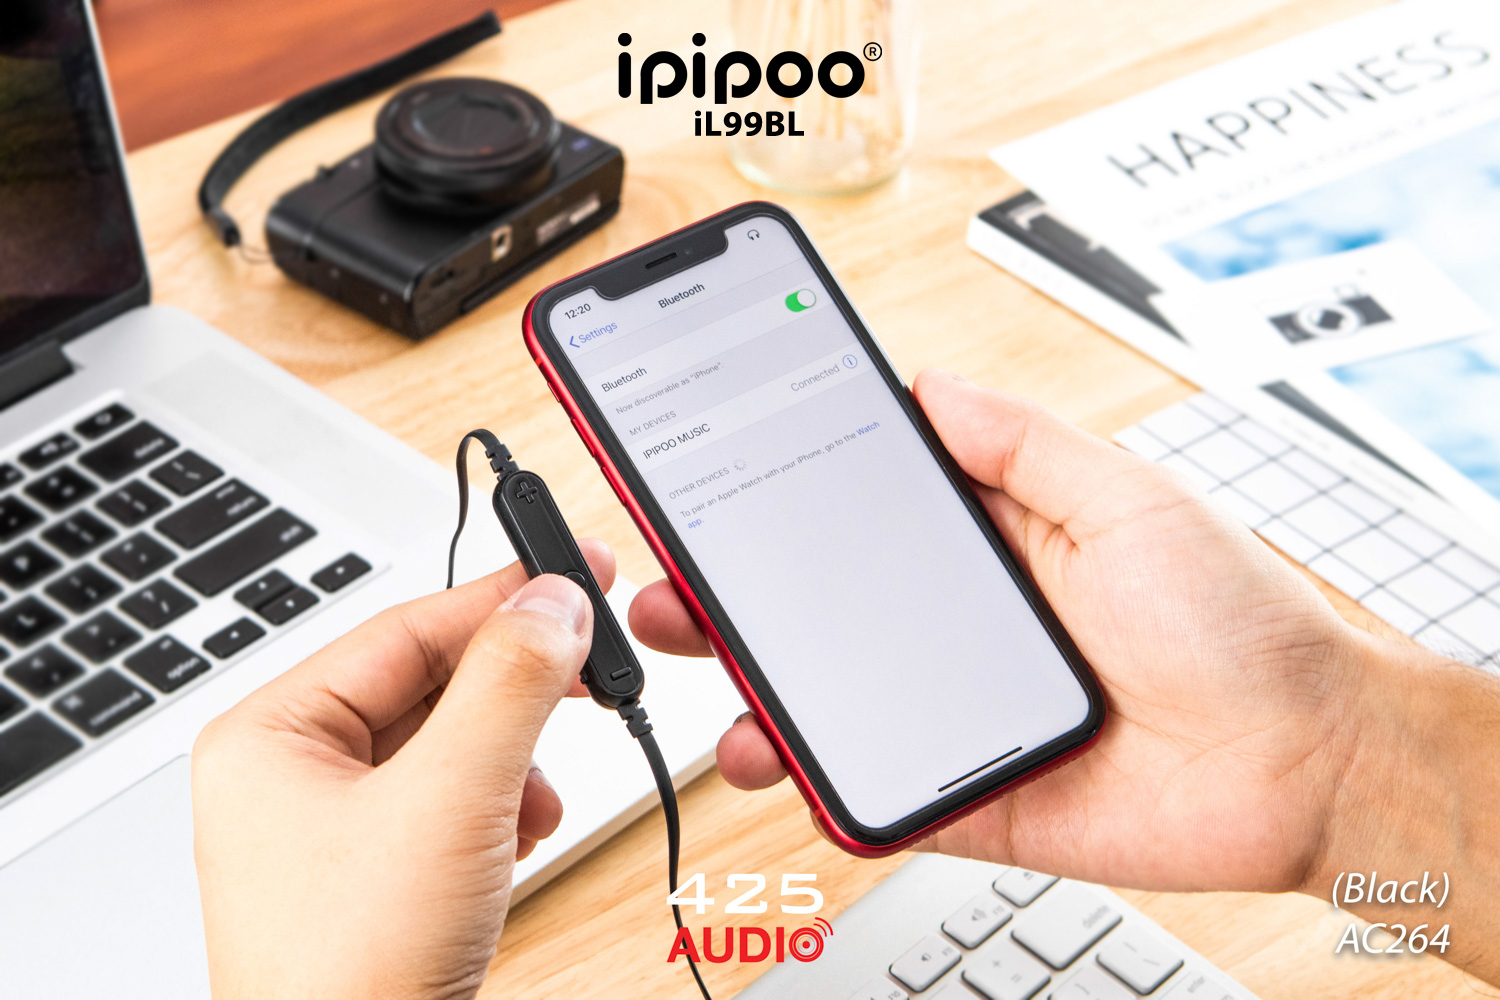 ipipoo,iL99BL,earphone,wireless earphone,bluetooth,bluetooth4.2,comfort,earbuds,smooth,longbattery,exercise,run,fitness,stereocall